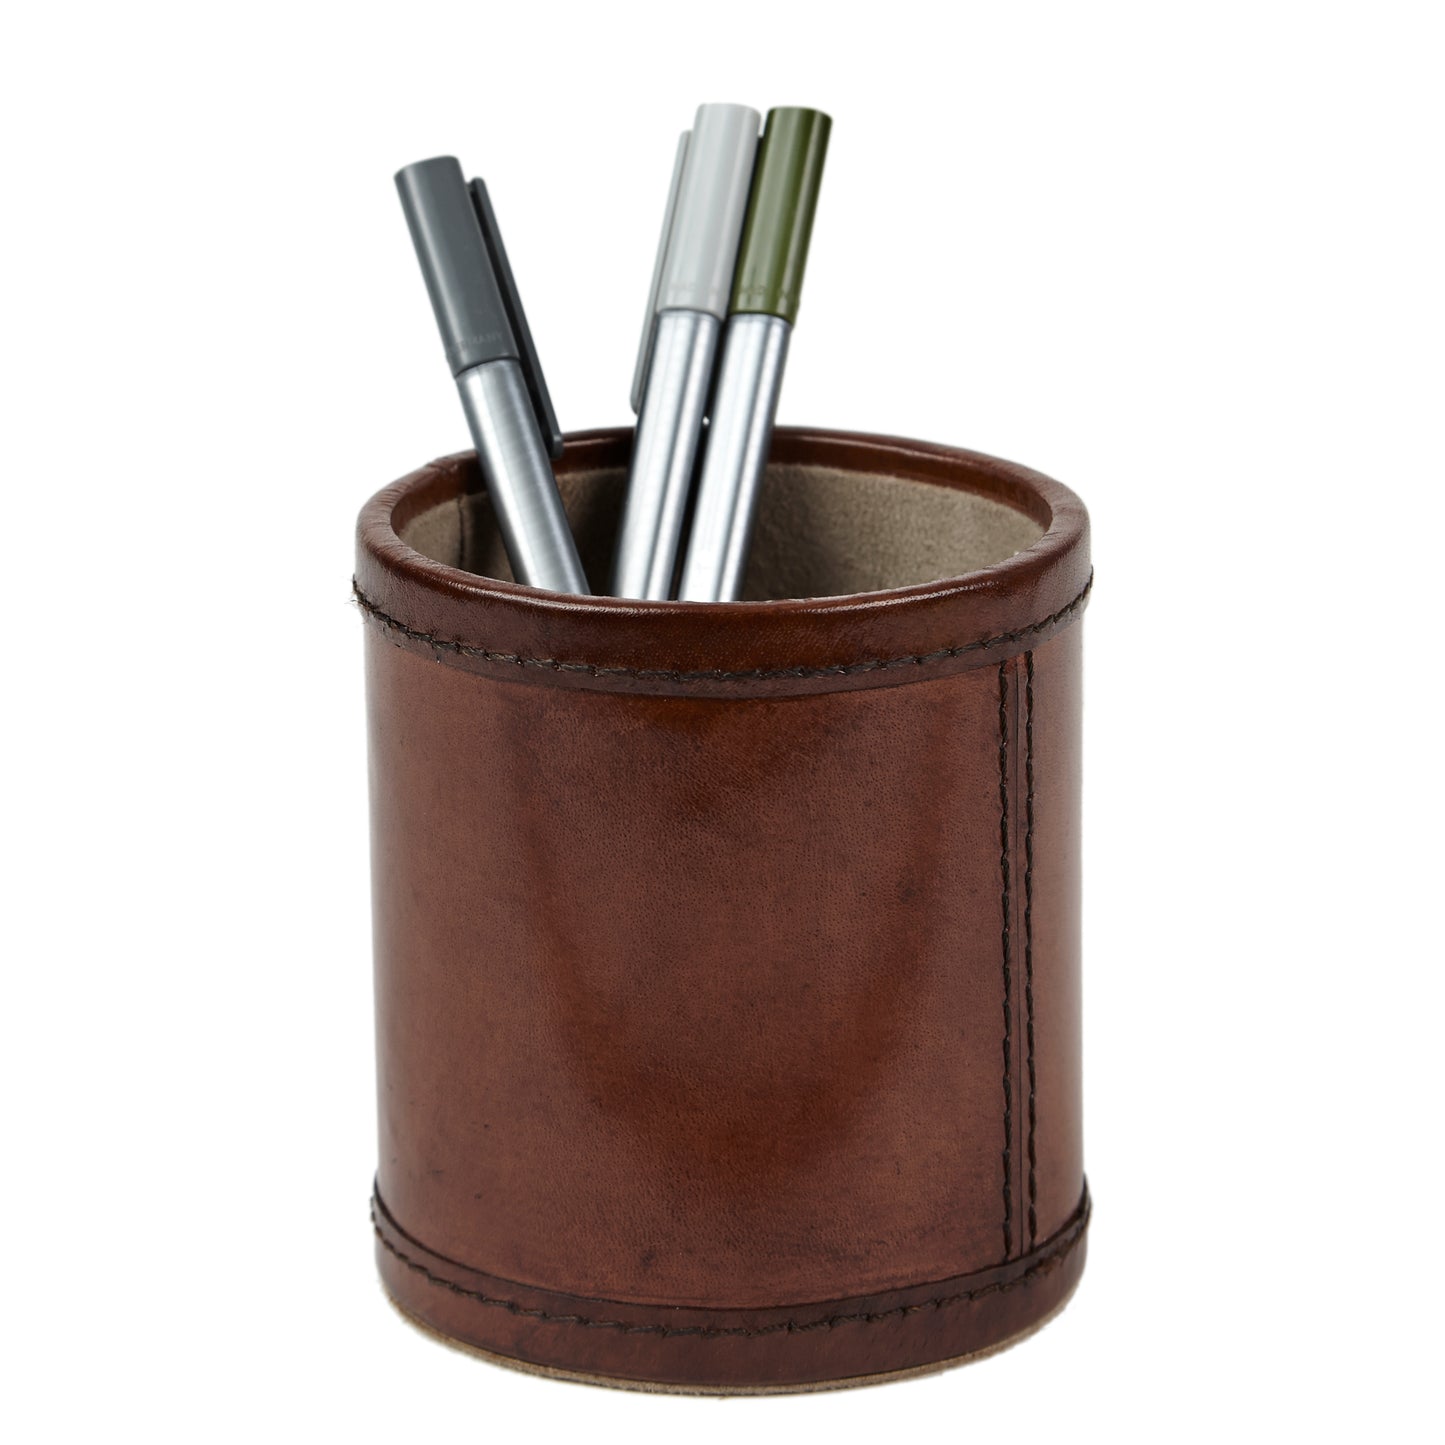 leather pen pot with pens in on white background